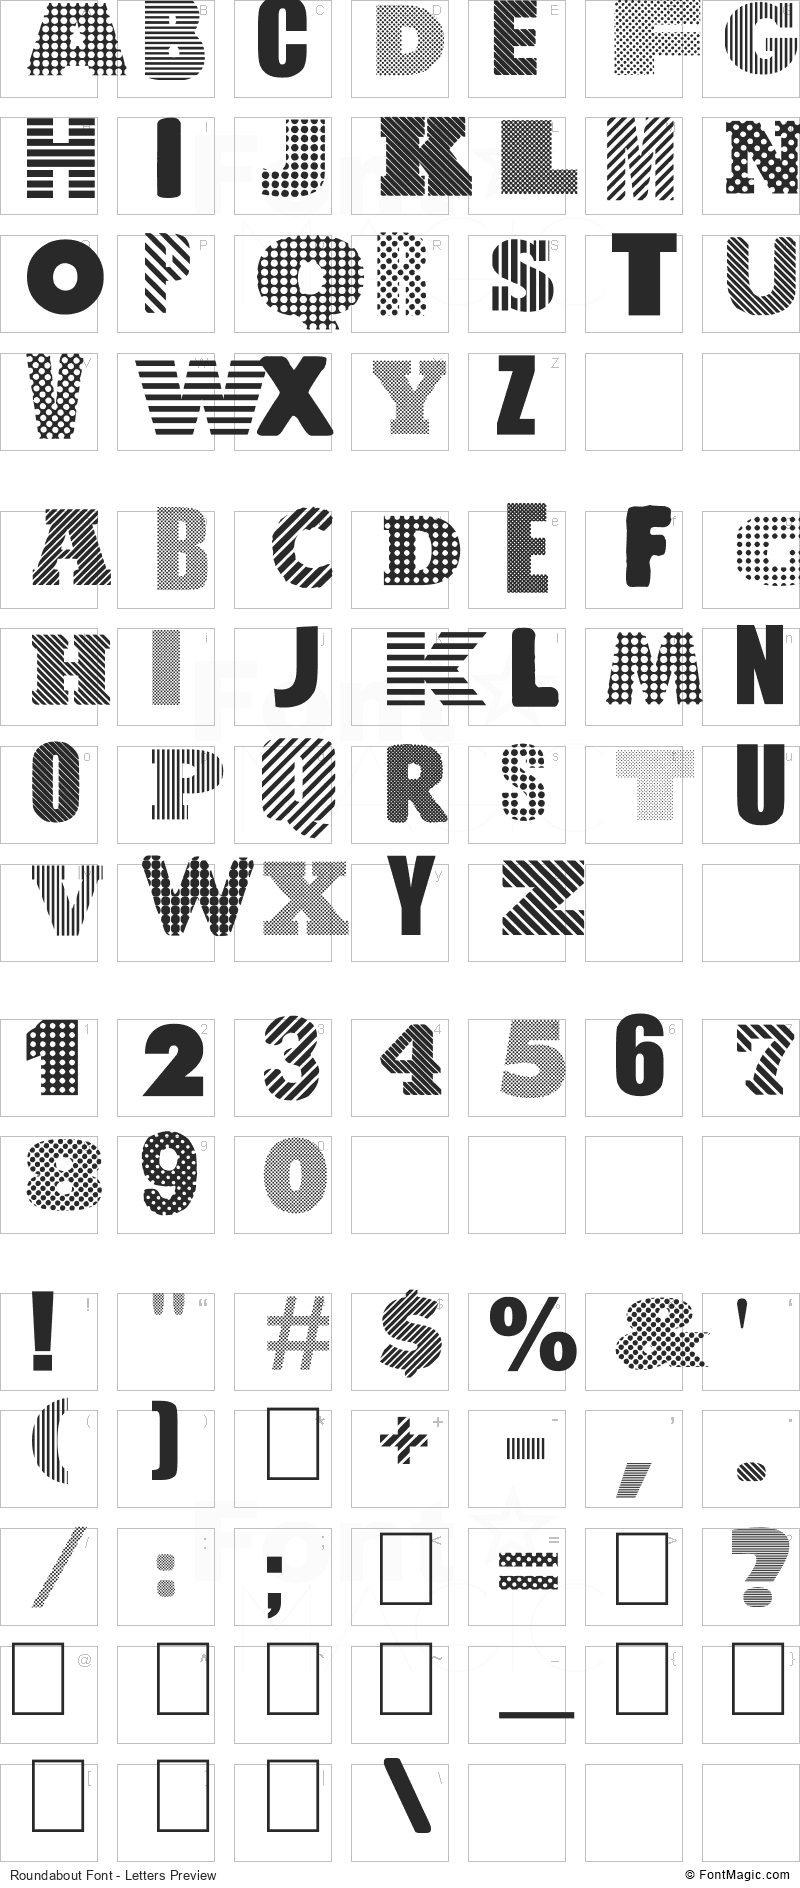 Roundabout Font - All Latters Preview Chart